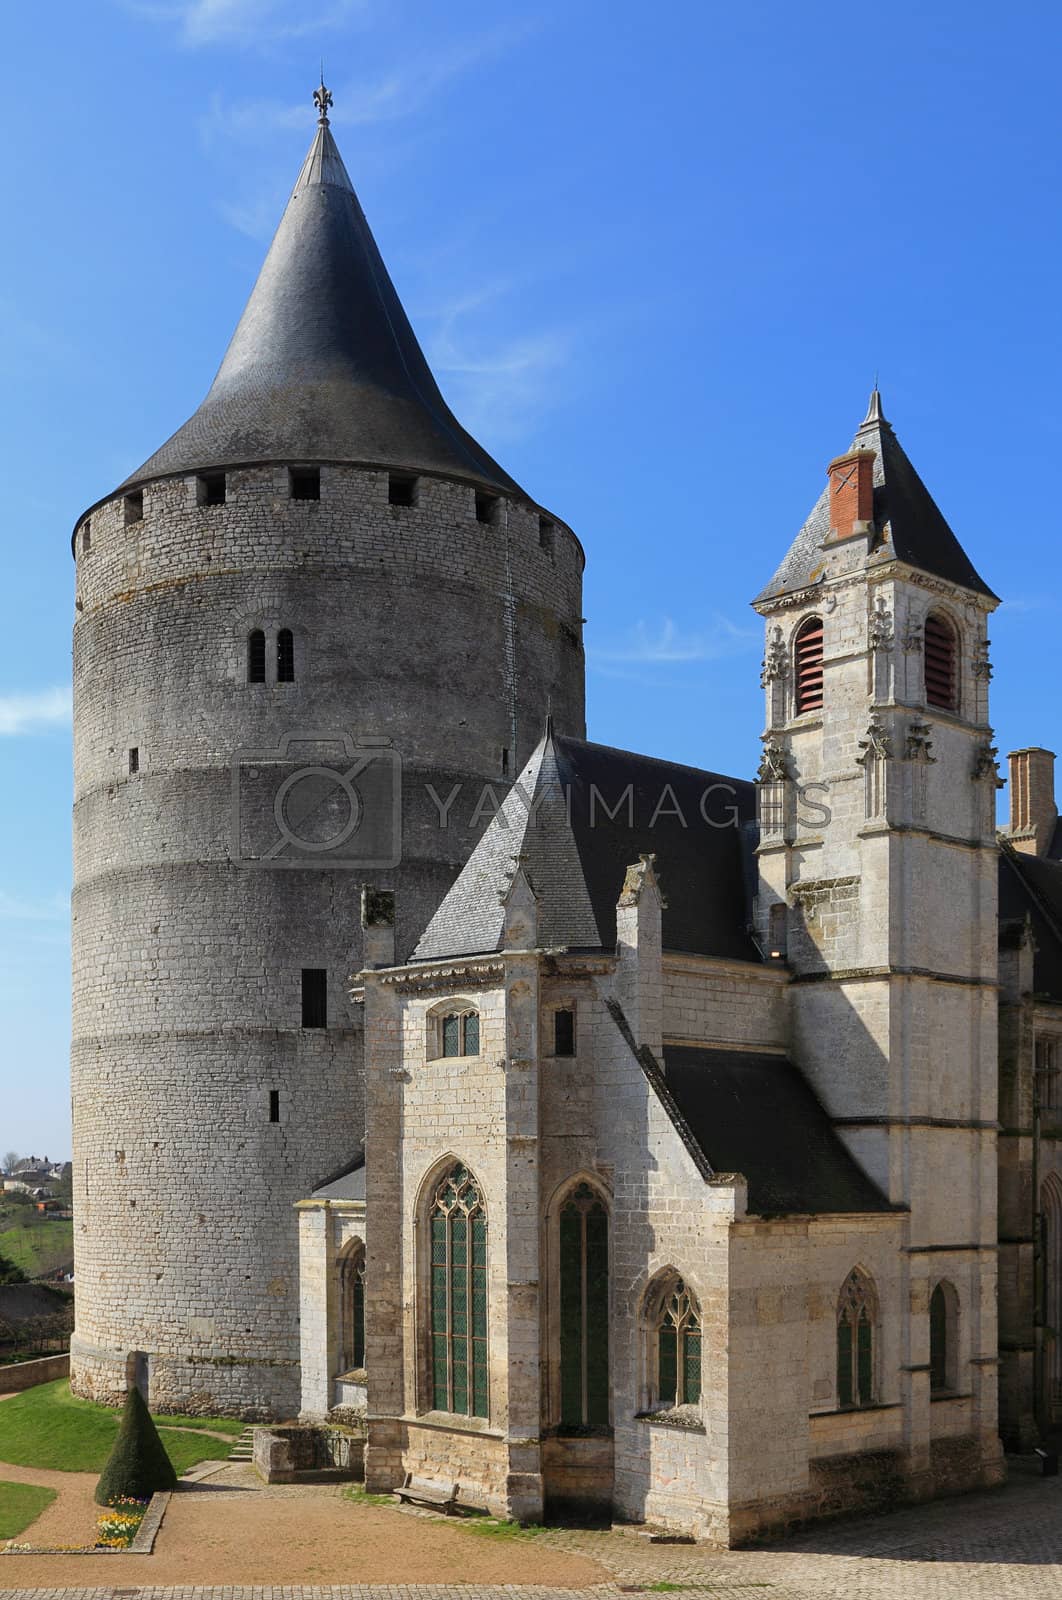 Royalty free image of Chateaudun castle by RazvanPhotography